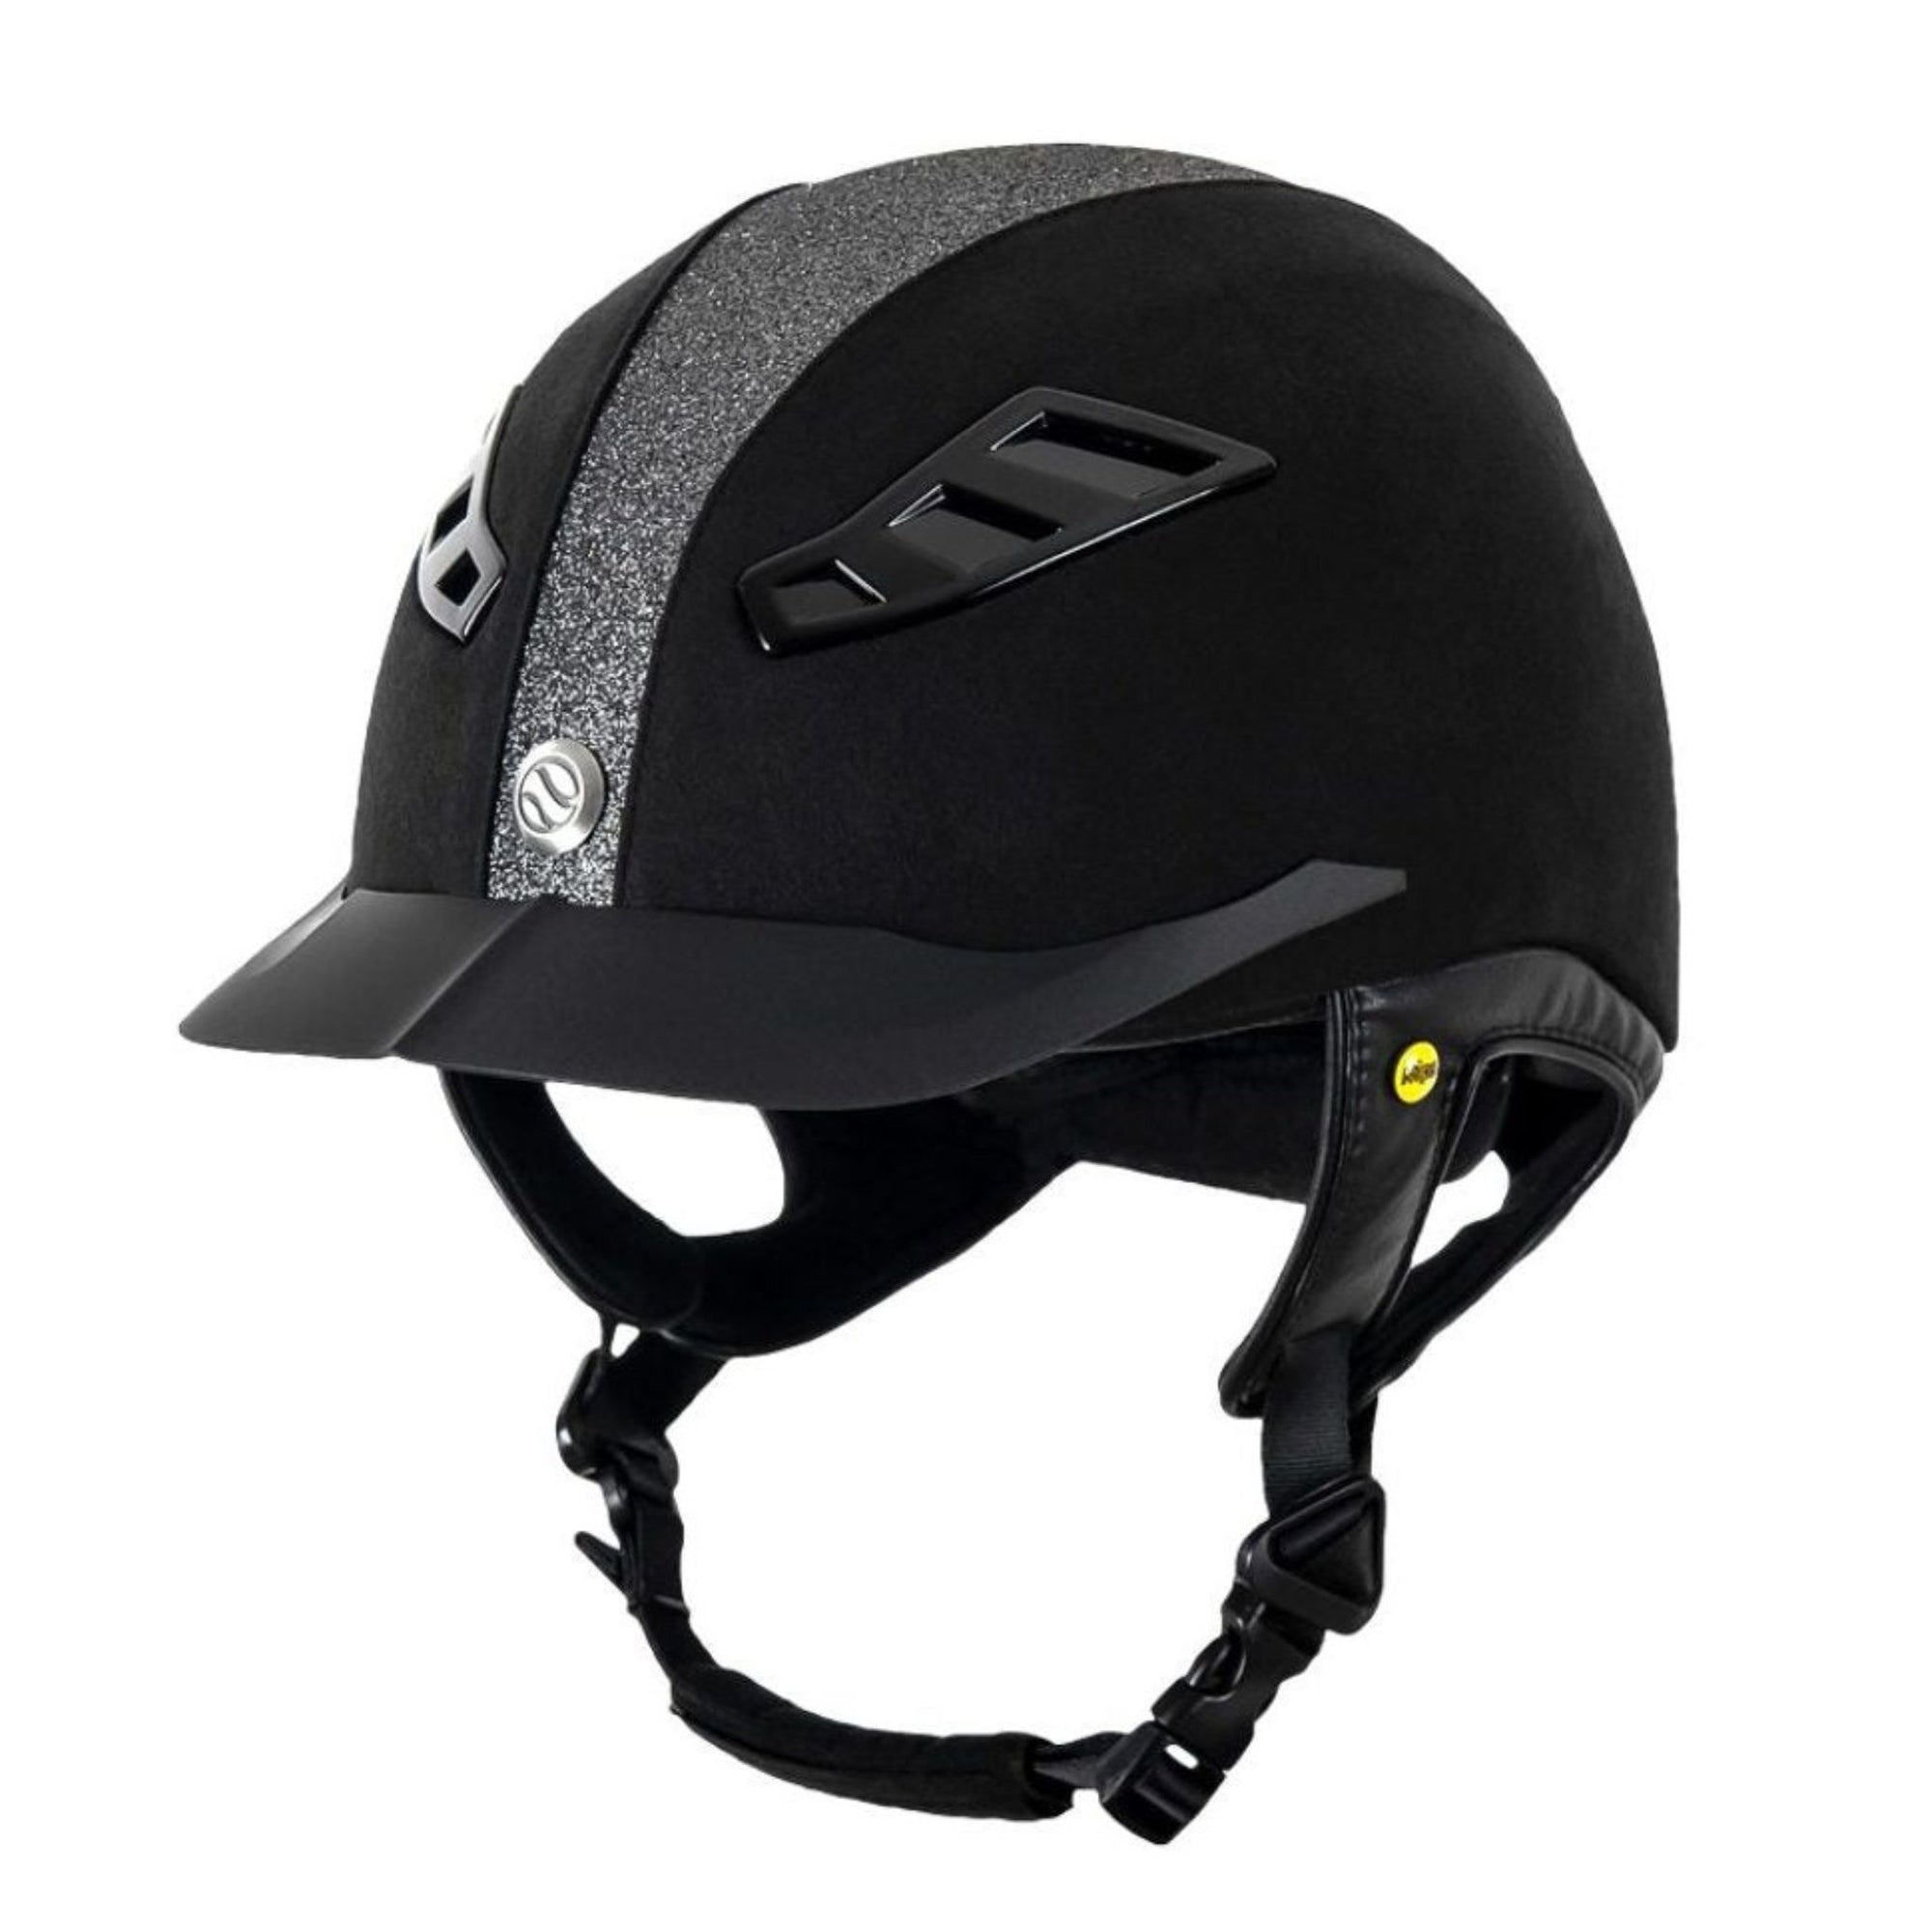 Lynx black microfiber helmet with silver sand texture down middle.